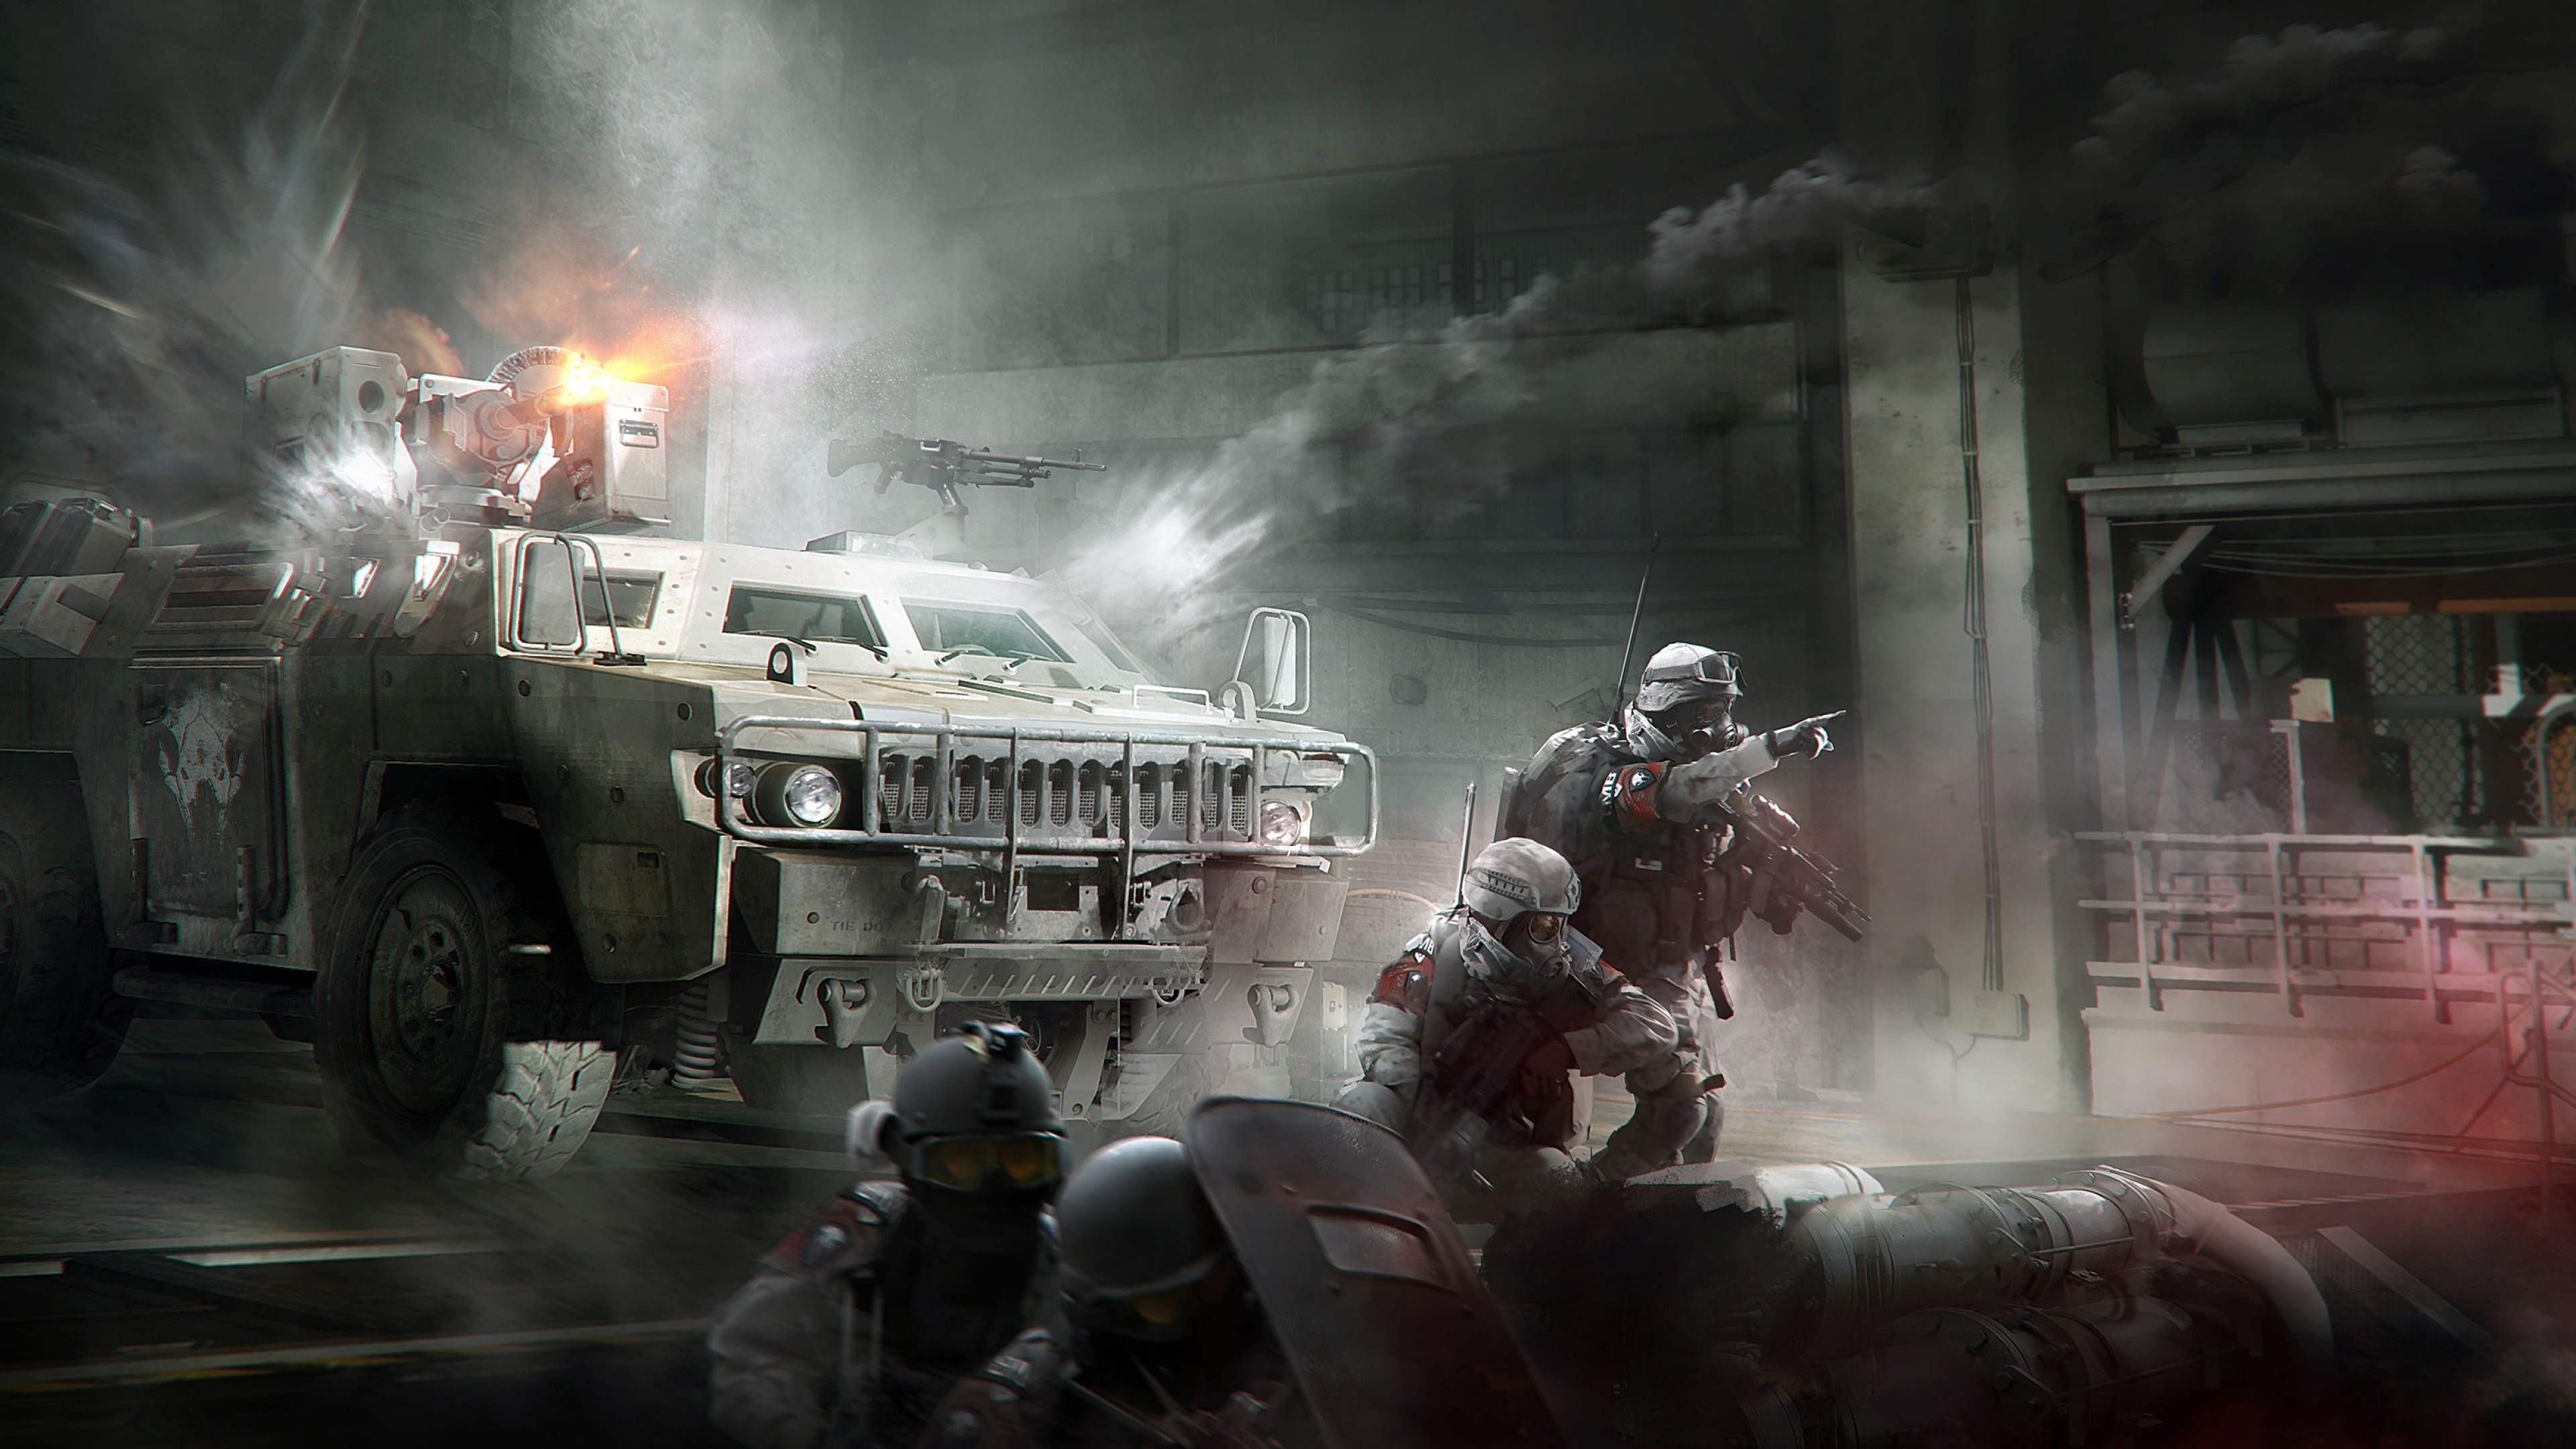 3840x2160 Tags: Falcon Lost, The Division, Tom Clancy's, 4K